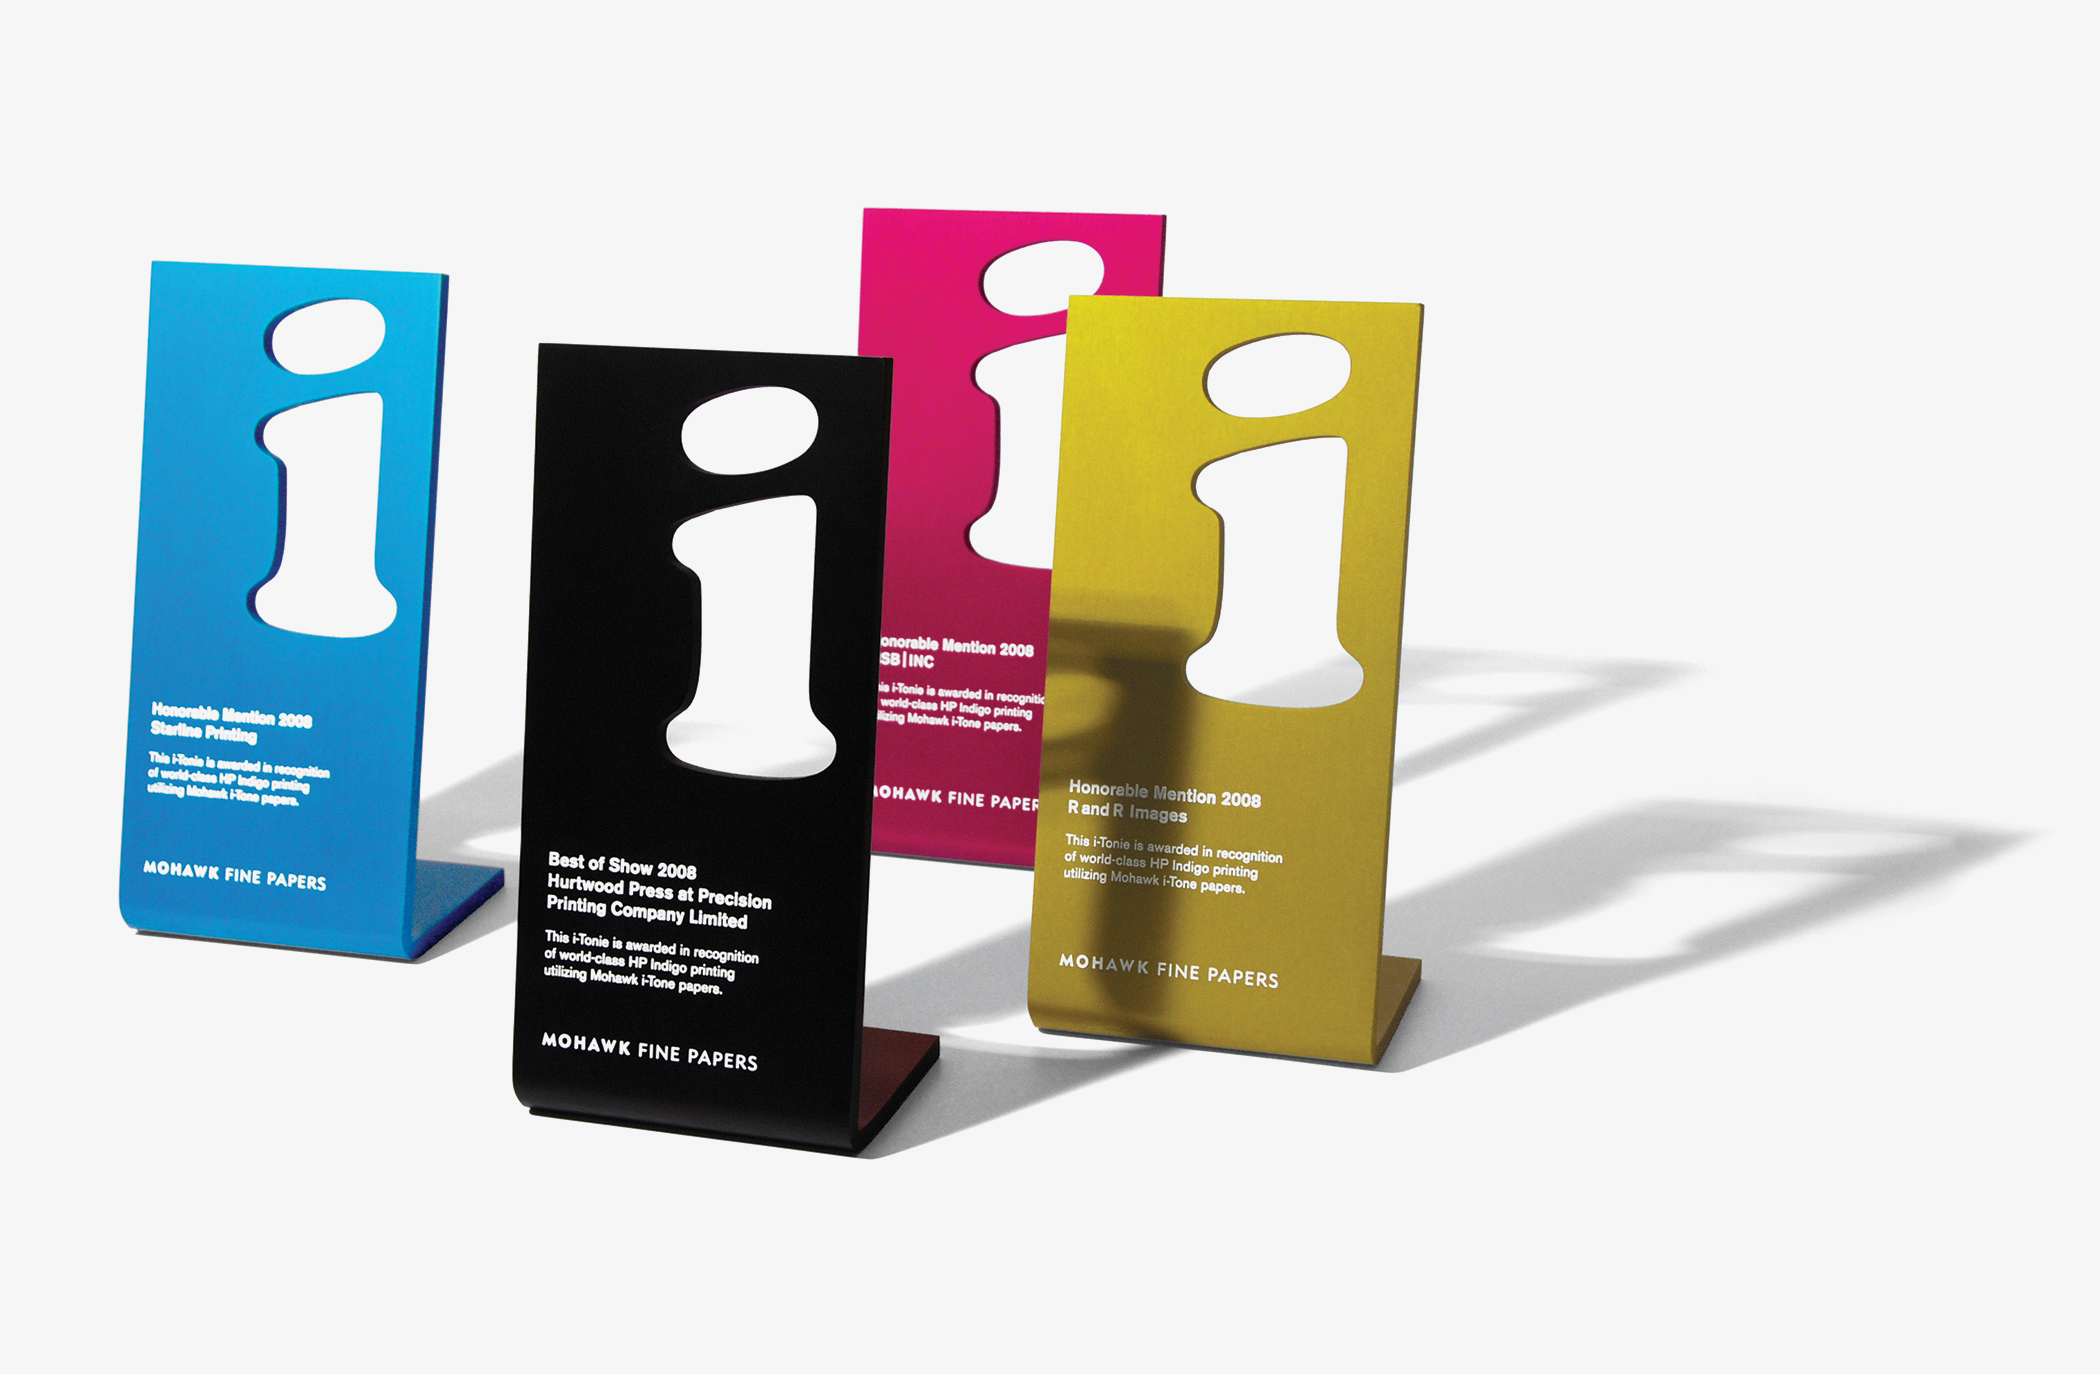 A set of four colorful Mohawk Fine Papers I tonies award statuettes with a cut-out lowercase letter I.